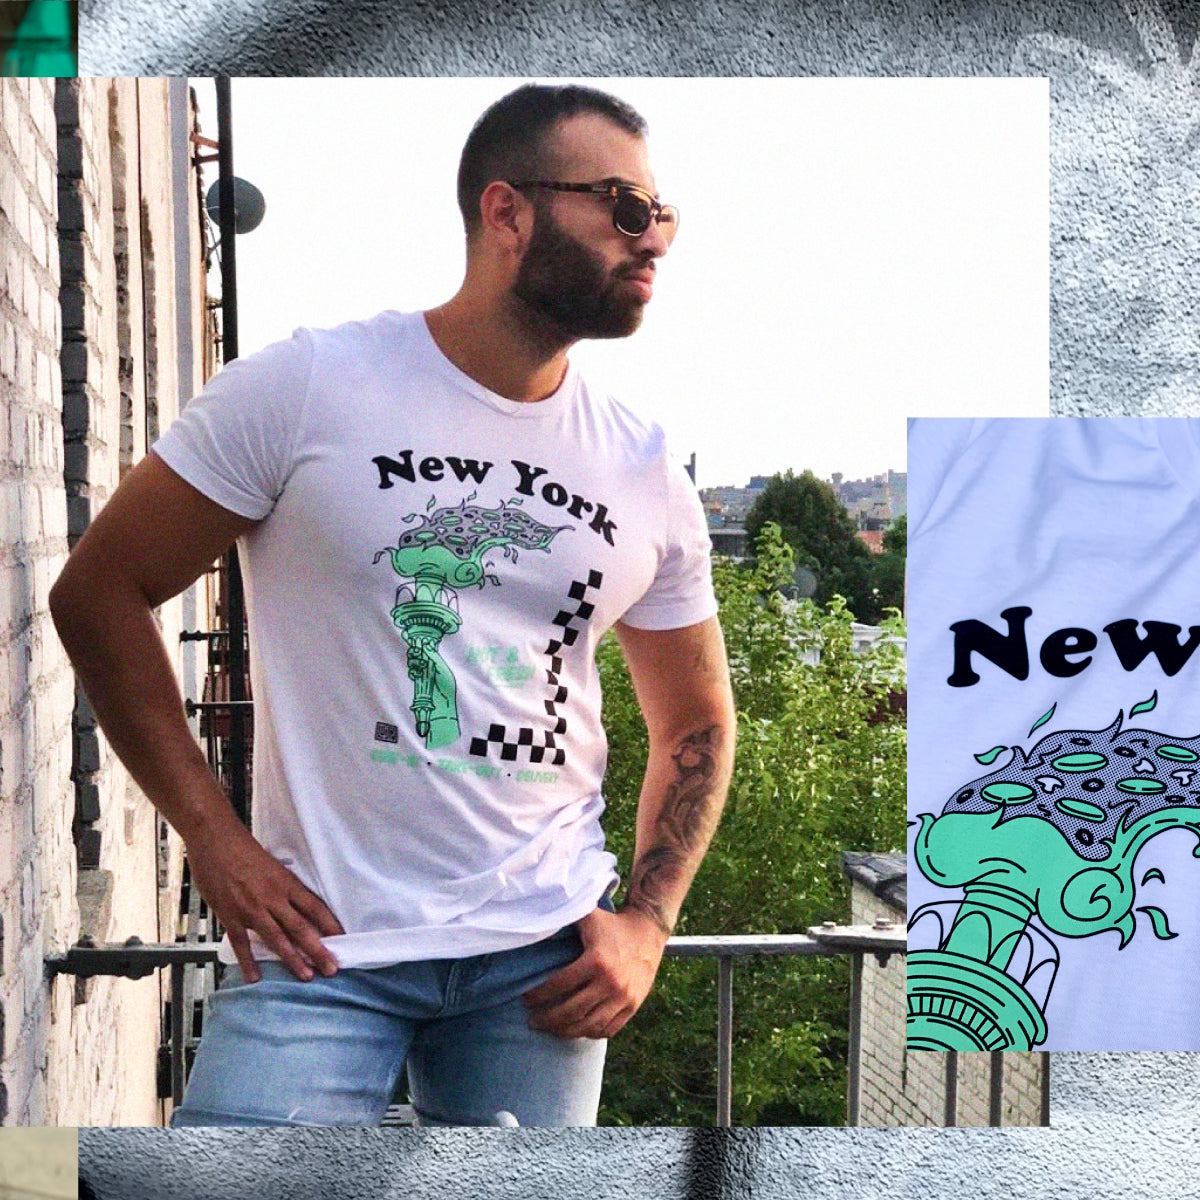 New York Hot and Fresh T-shirt by Lulab